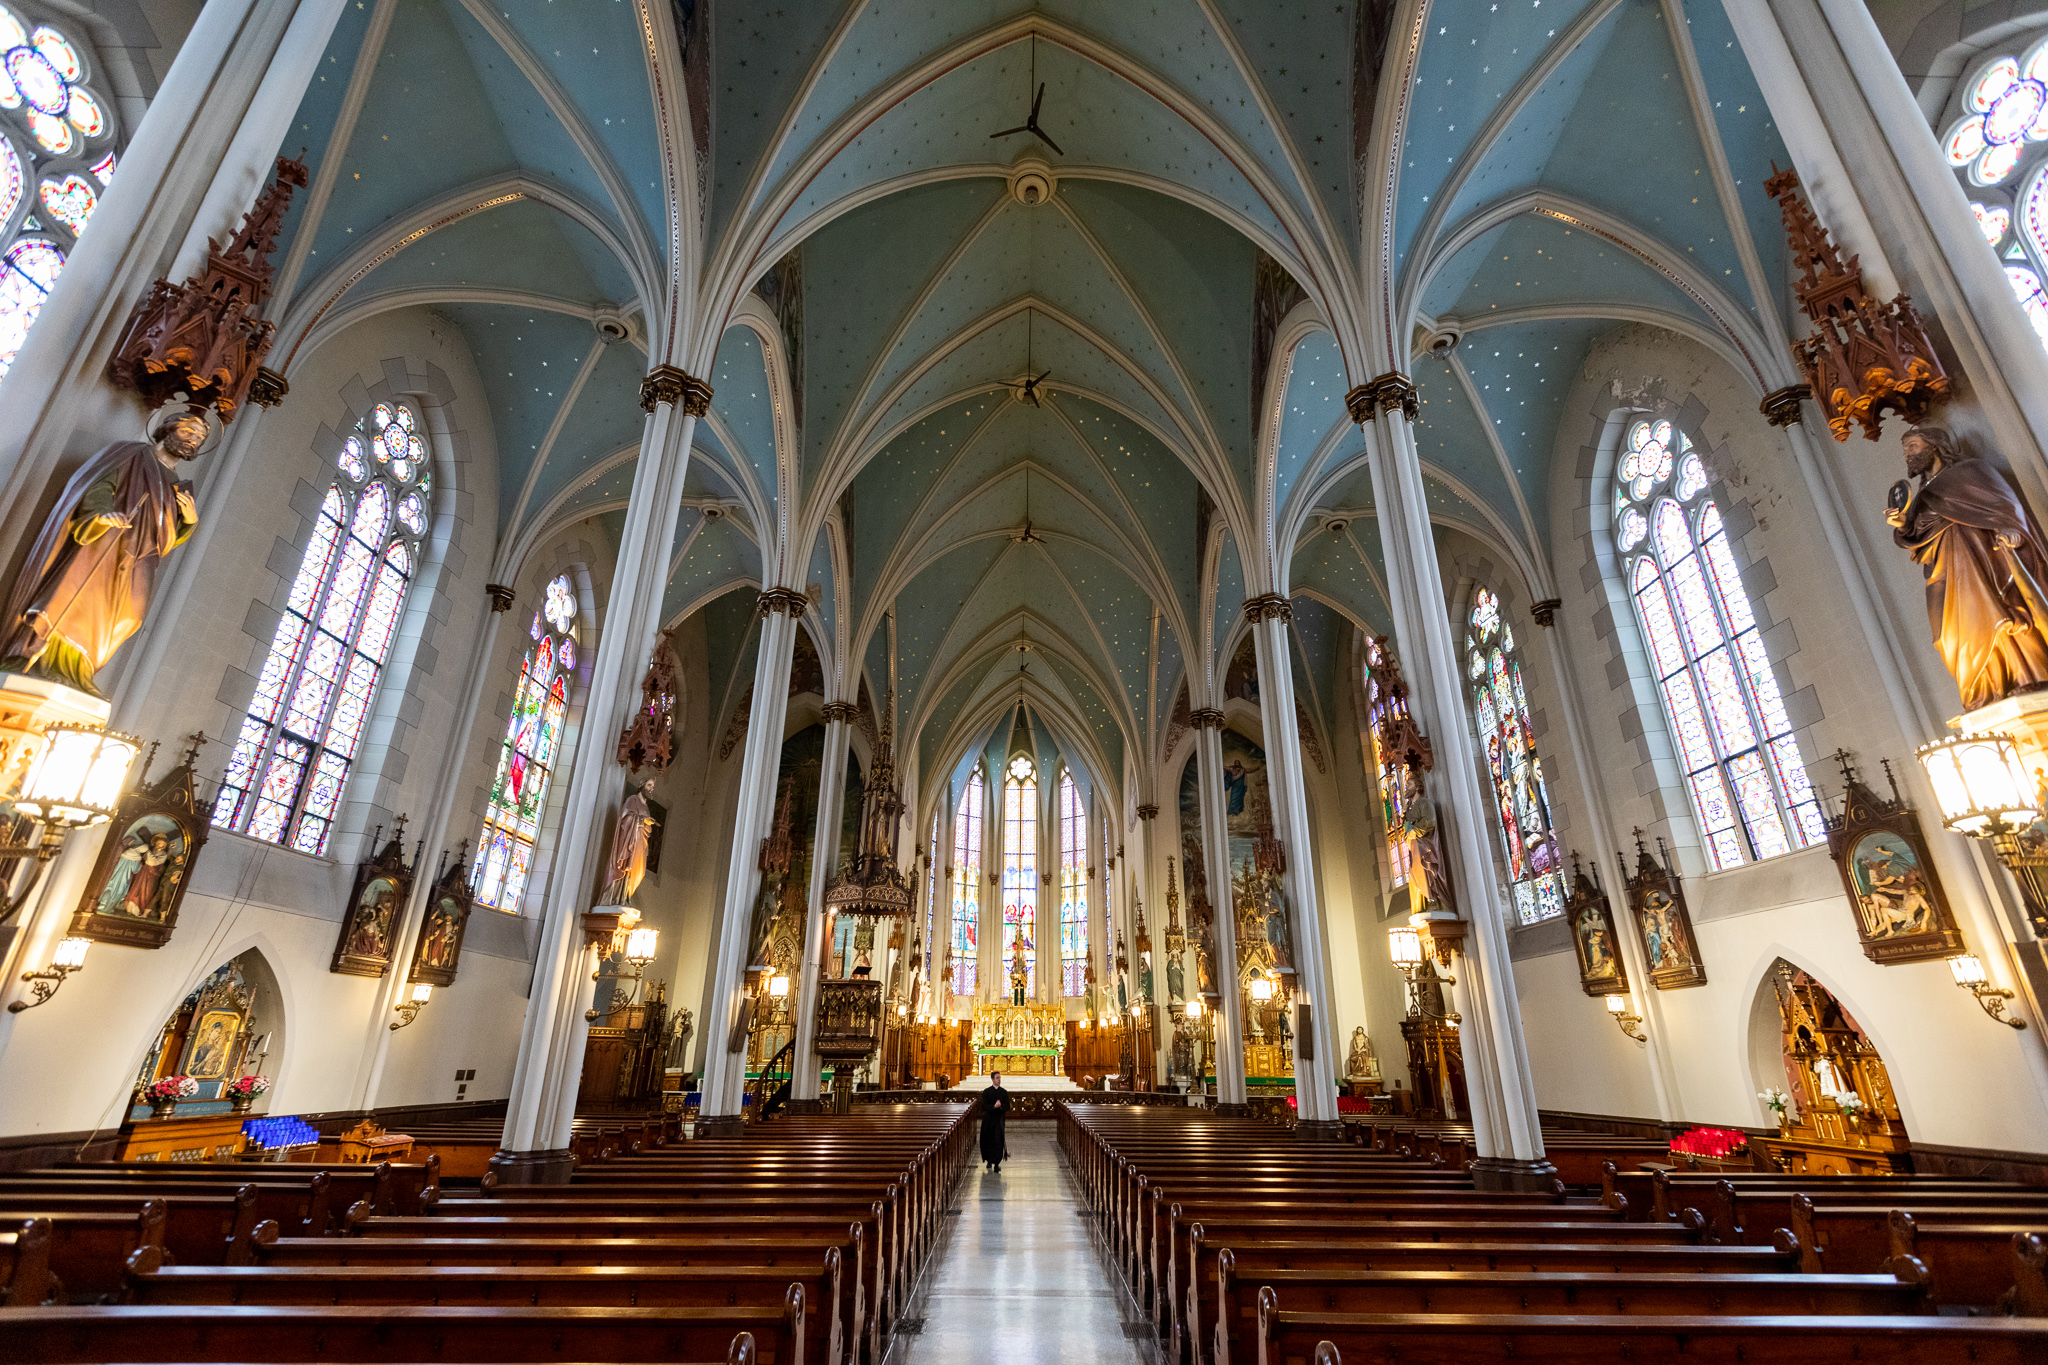 The nave of a church with rows of pews and a center aisle. The ceiling has many vaults and curves and is painted light blue. There’s also arched windows on either side, some of which have stained glass.